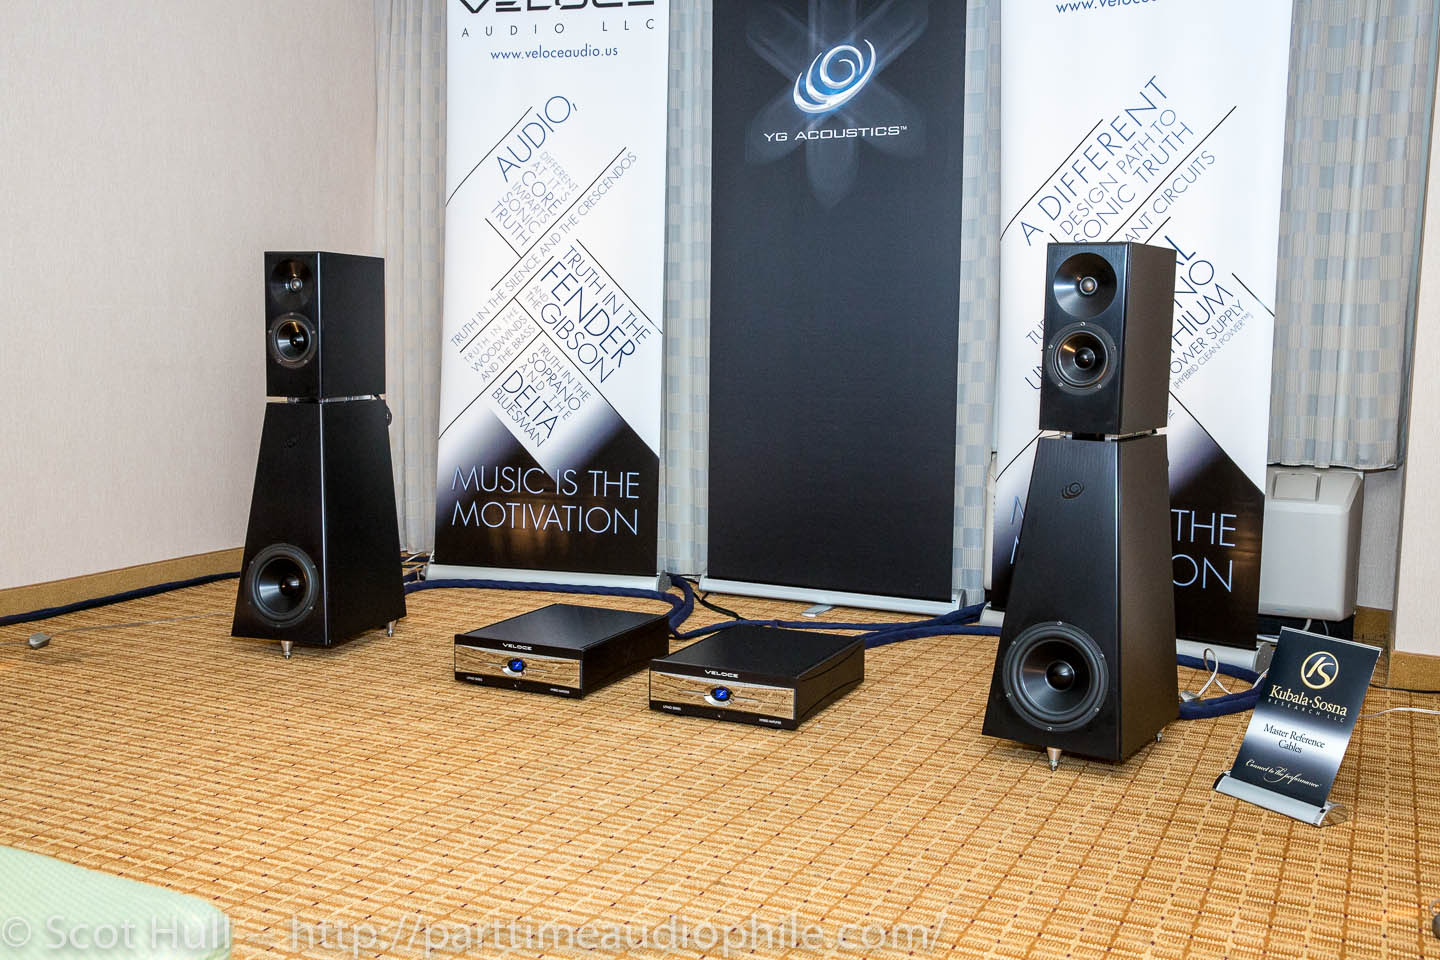 Veloce Audio with Kronos Audio and YG Acoustics